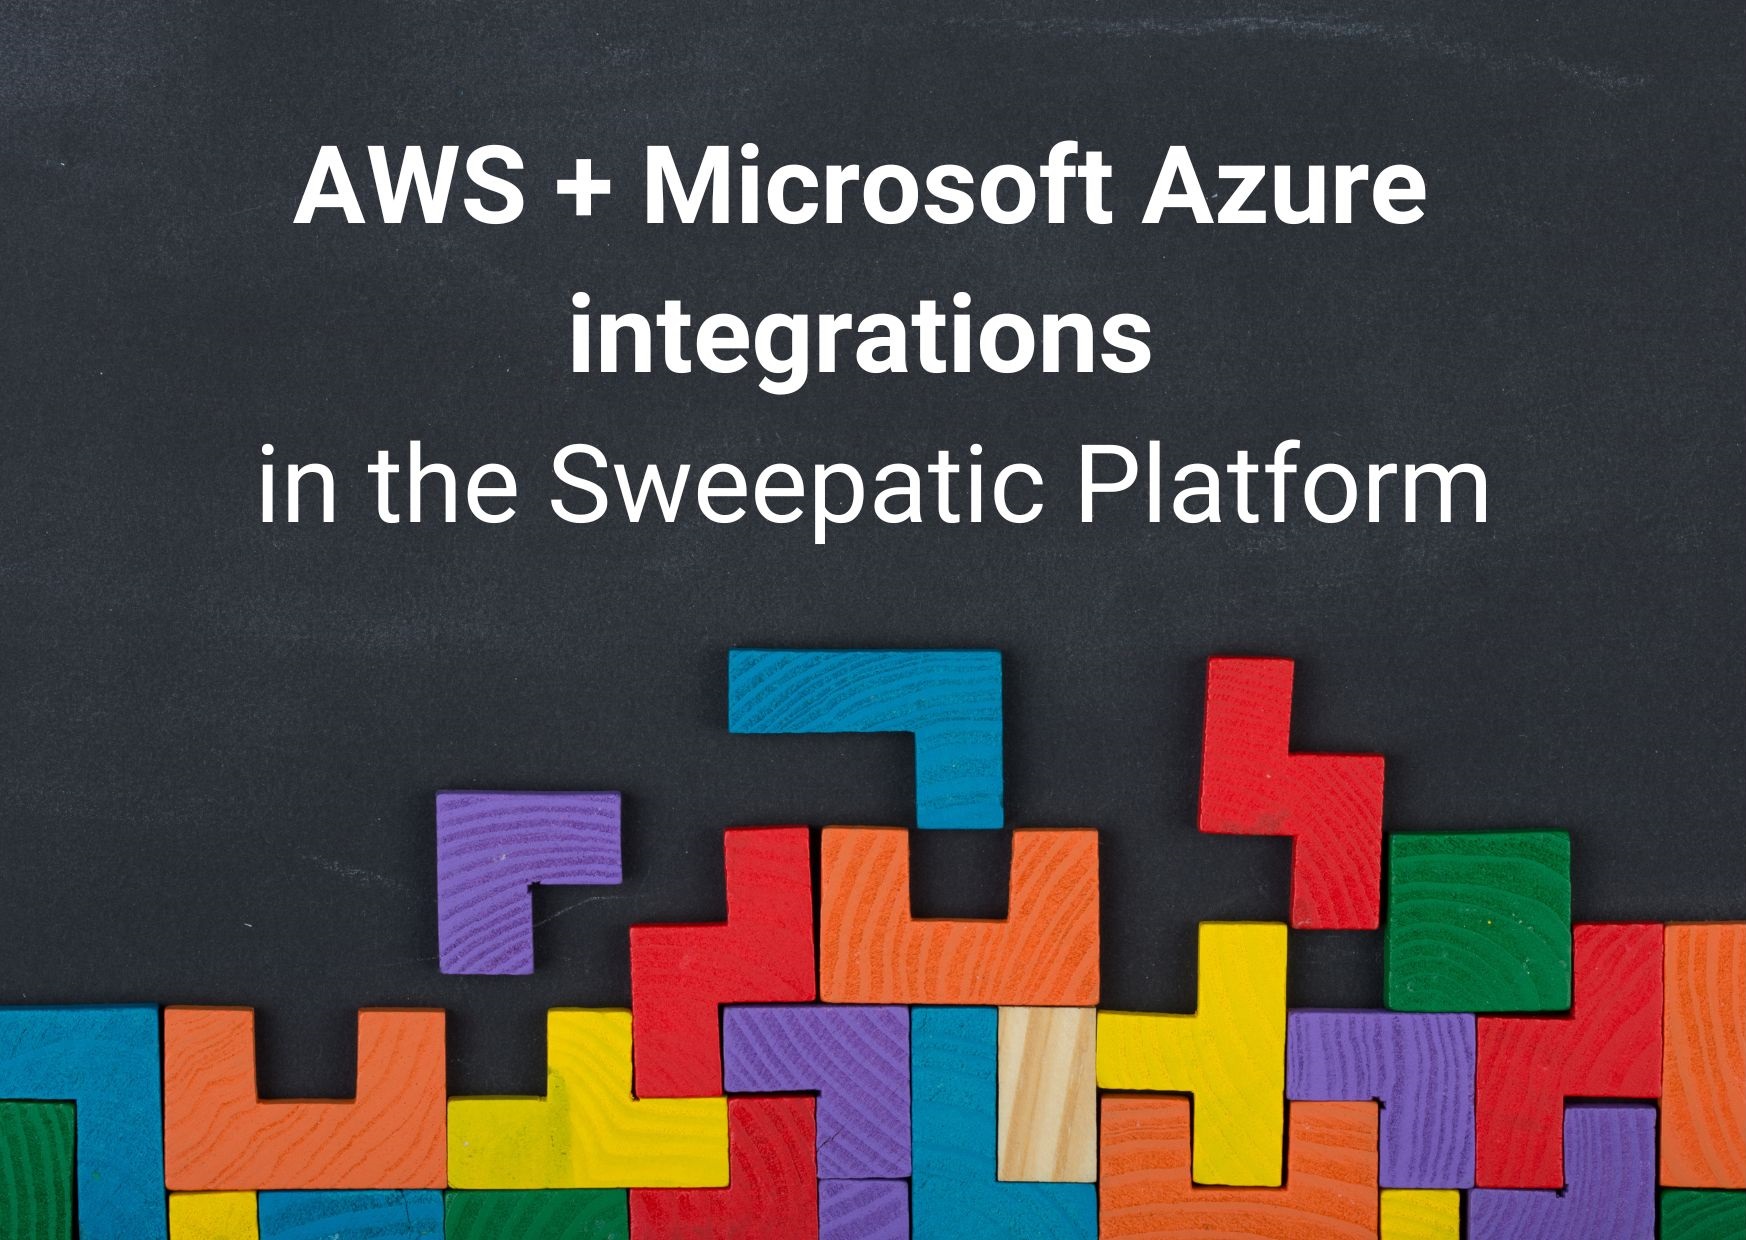 Sweepatic EASM Platform offers AWS and Azure integration